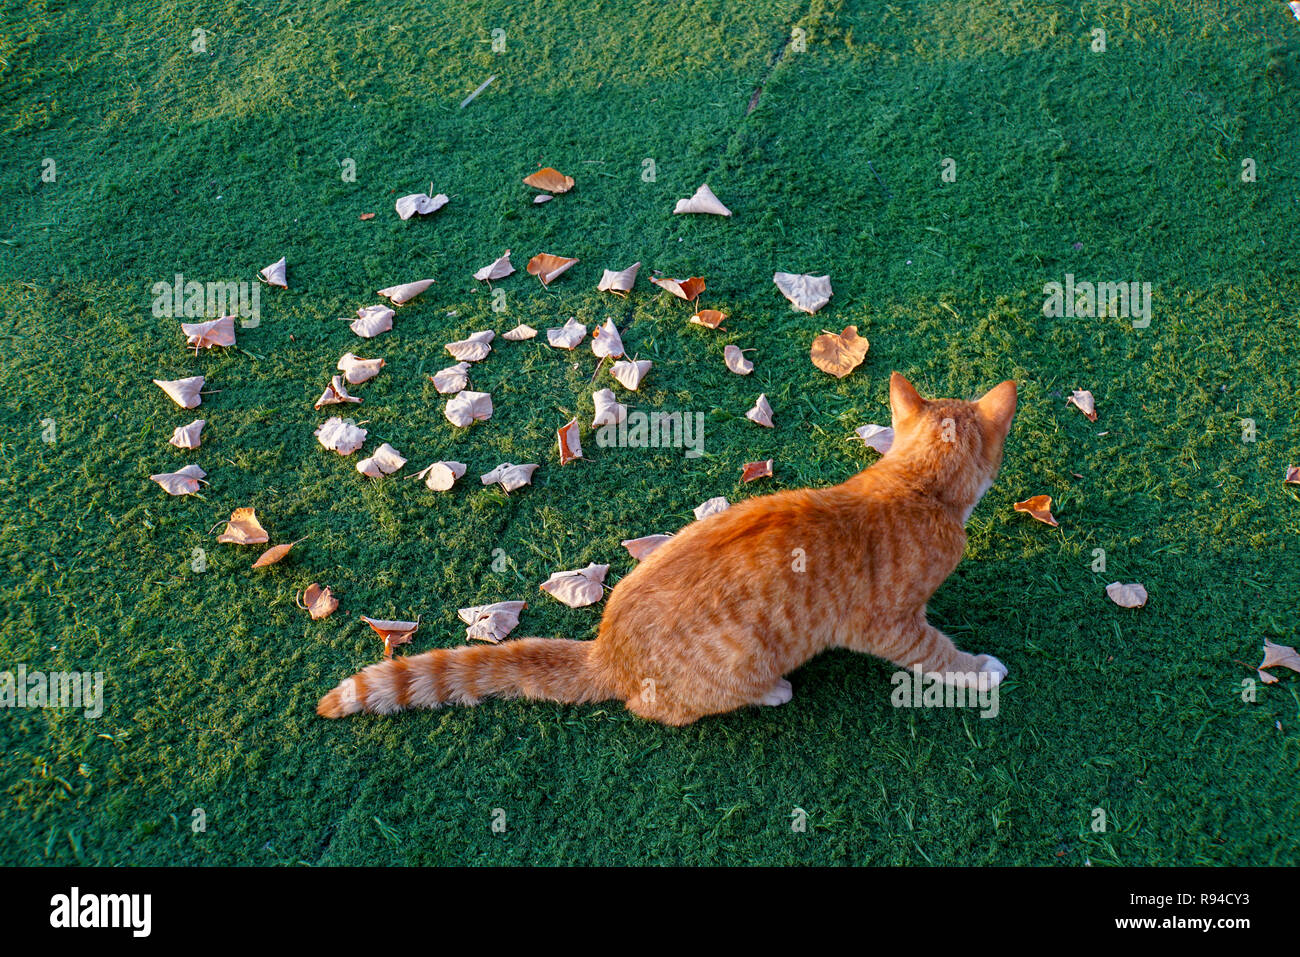 cat is curious by leafs in a spiral design on green grass Stock Photo